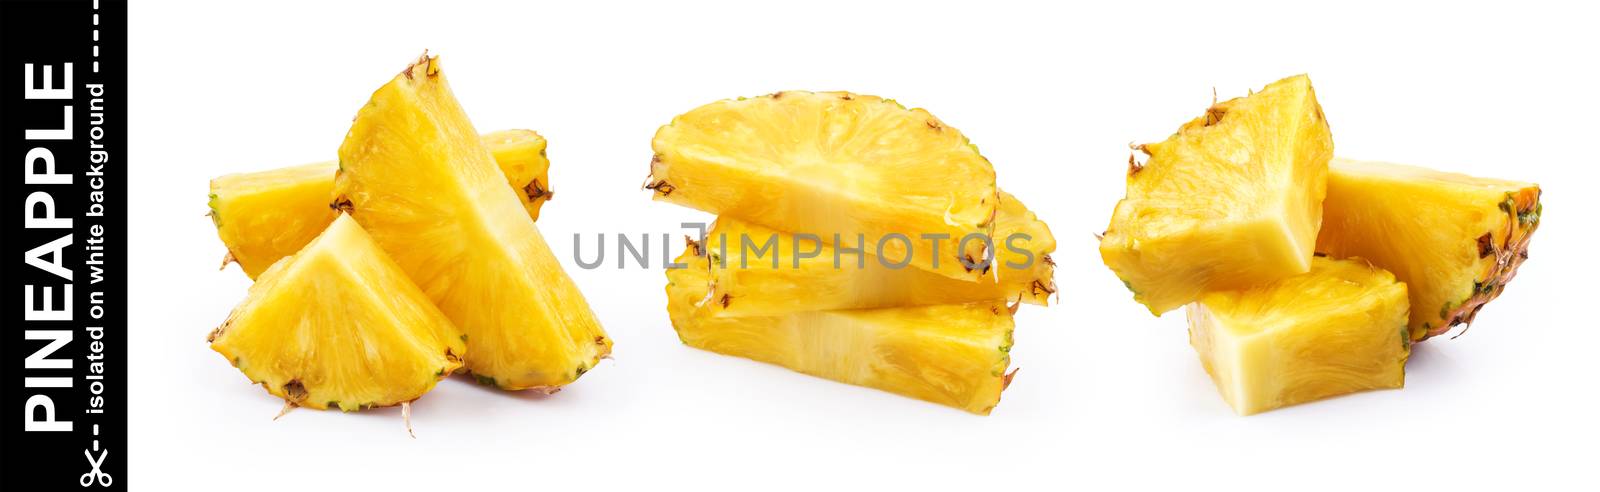 Pineapple slices isolated on white background. Collection